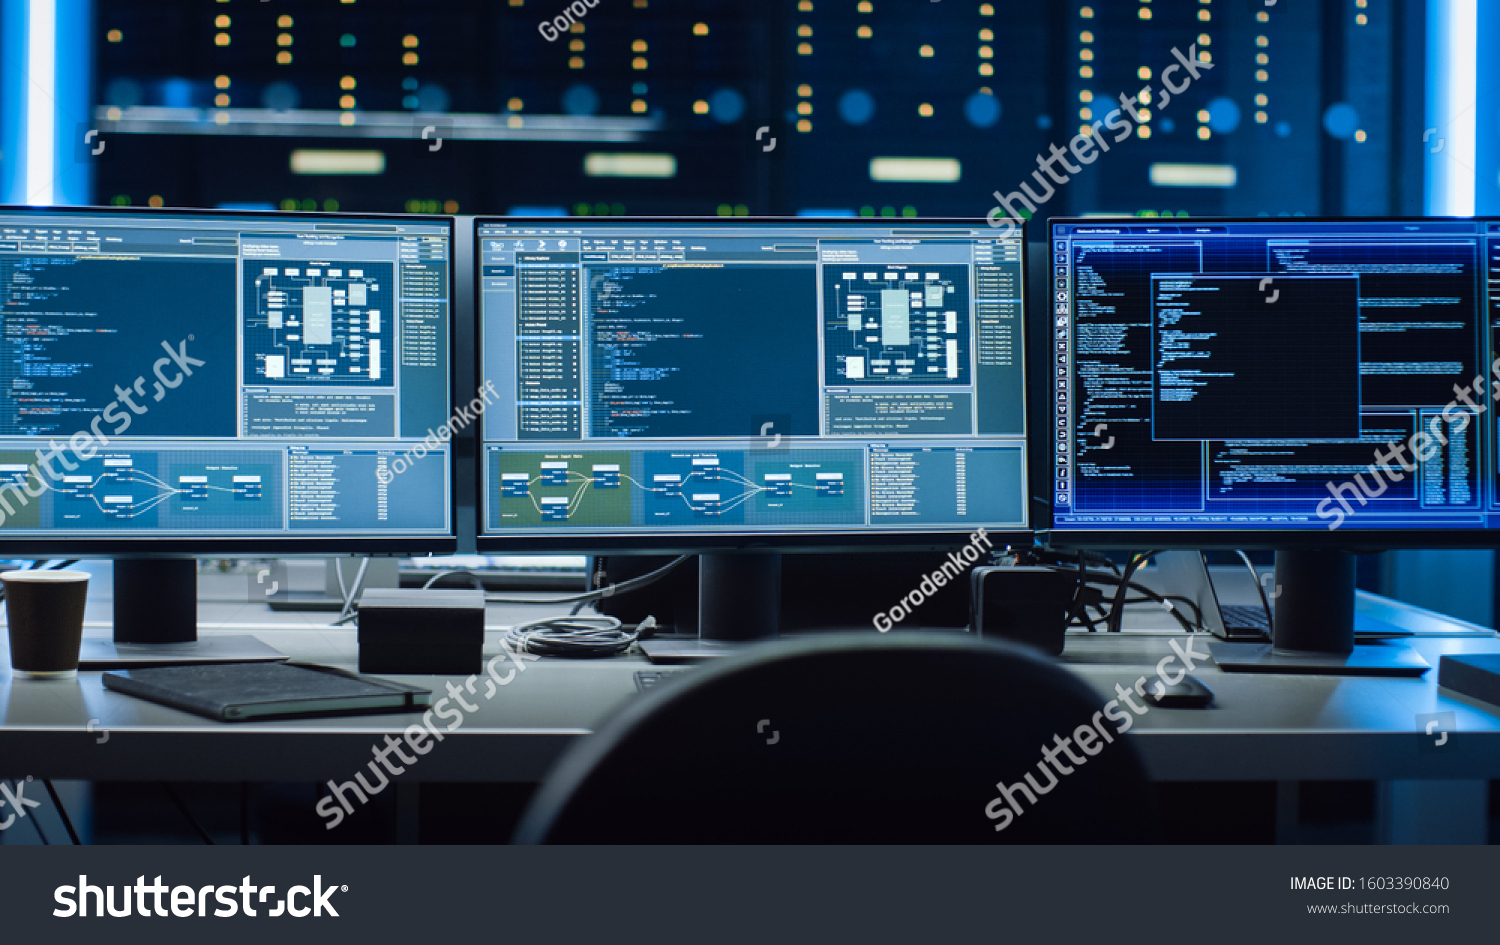 Shot of Multiple Personal Computer Monitors Showing Coding Language Program with System Monitoring Interface. In the Background Data Center with Server Racks. #1603390840